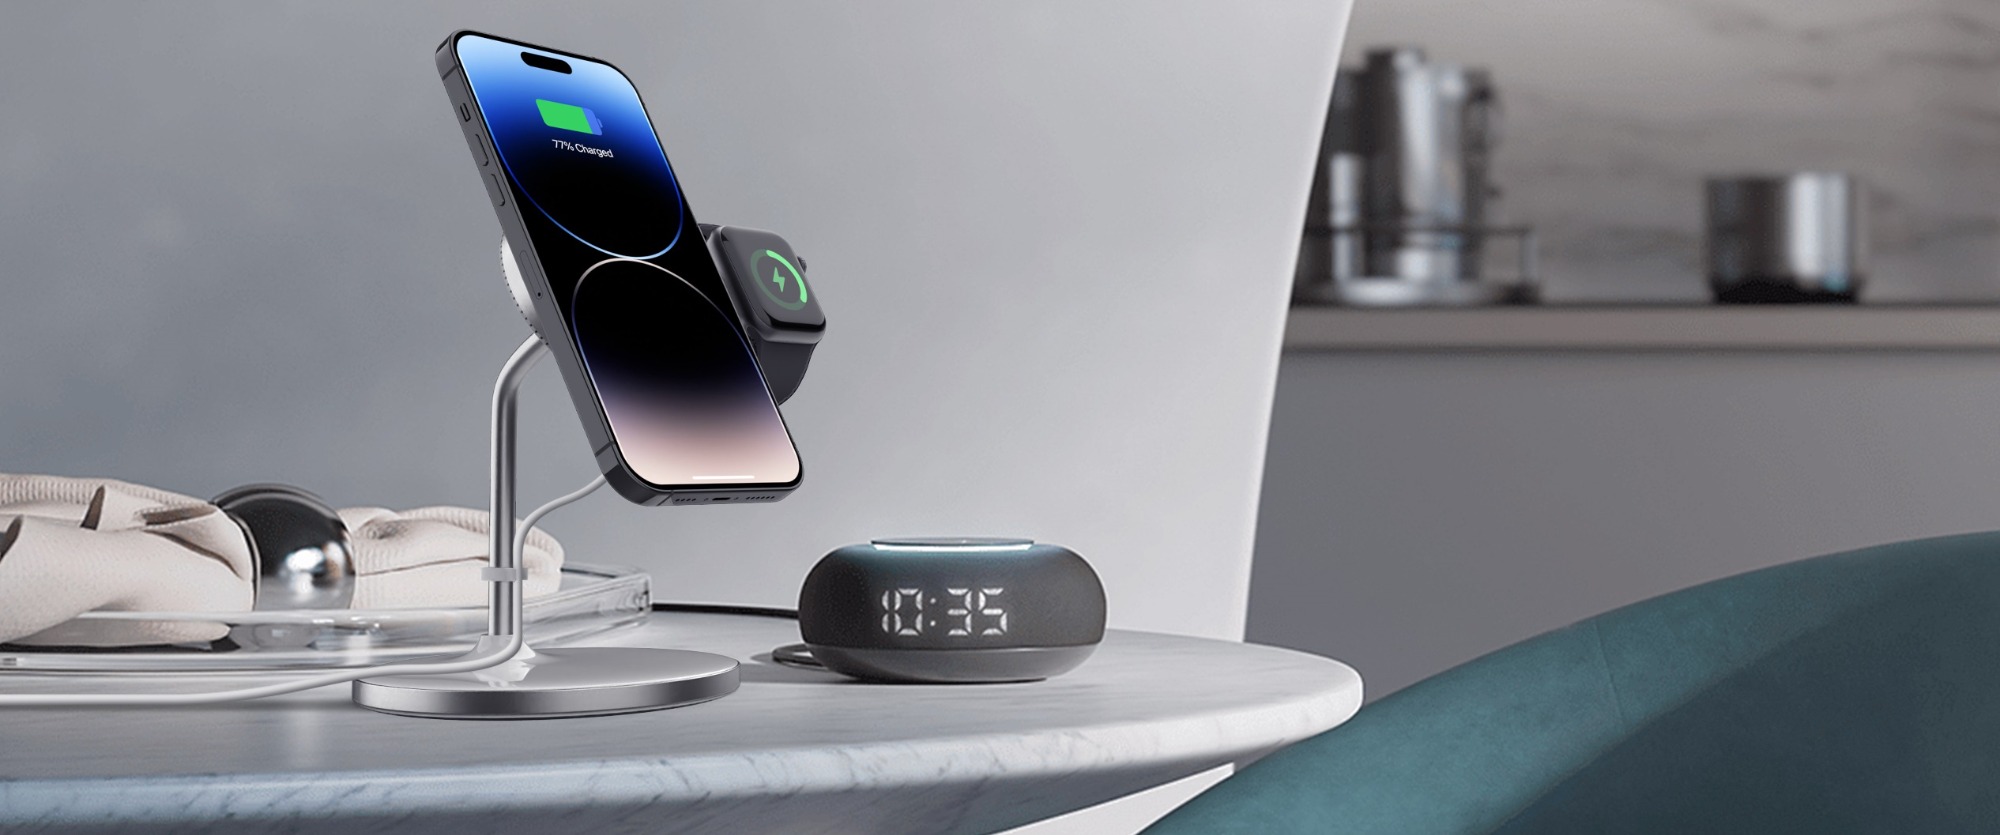 Datachable 2-in-1 Magnetic Wireless Charger DT-680